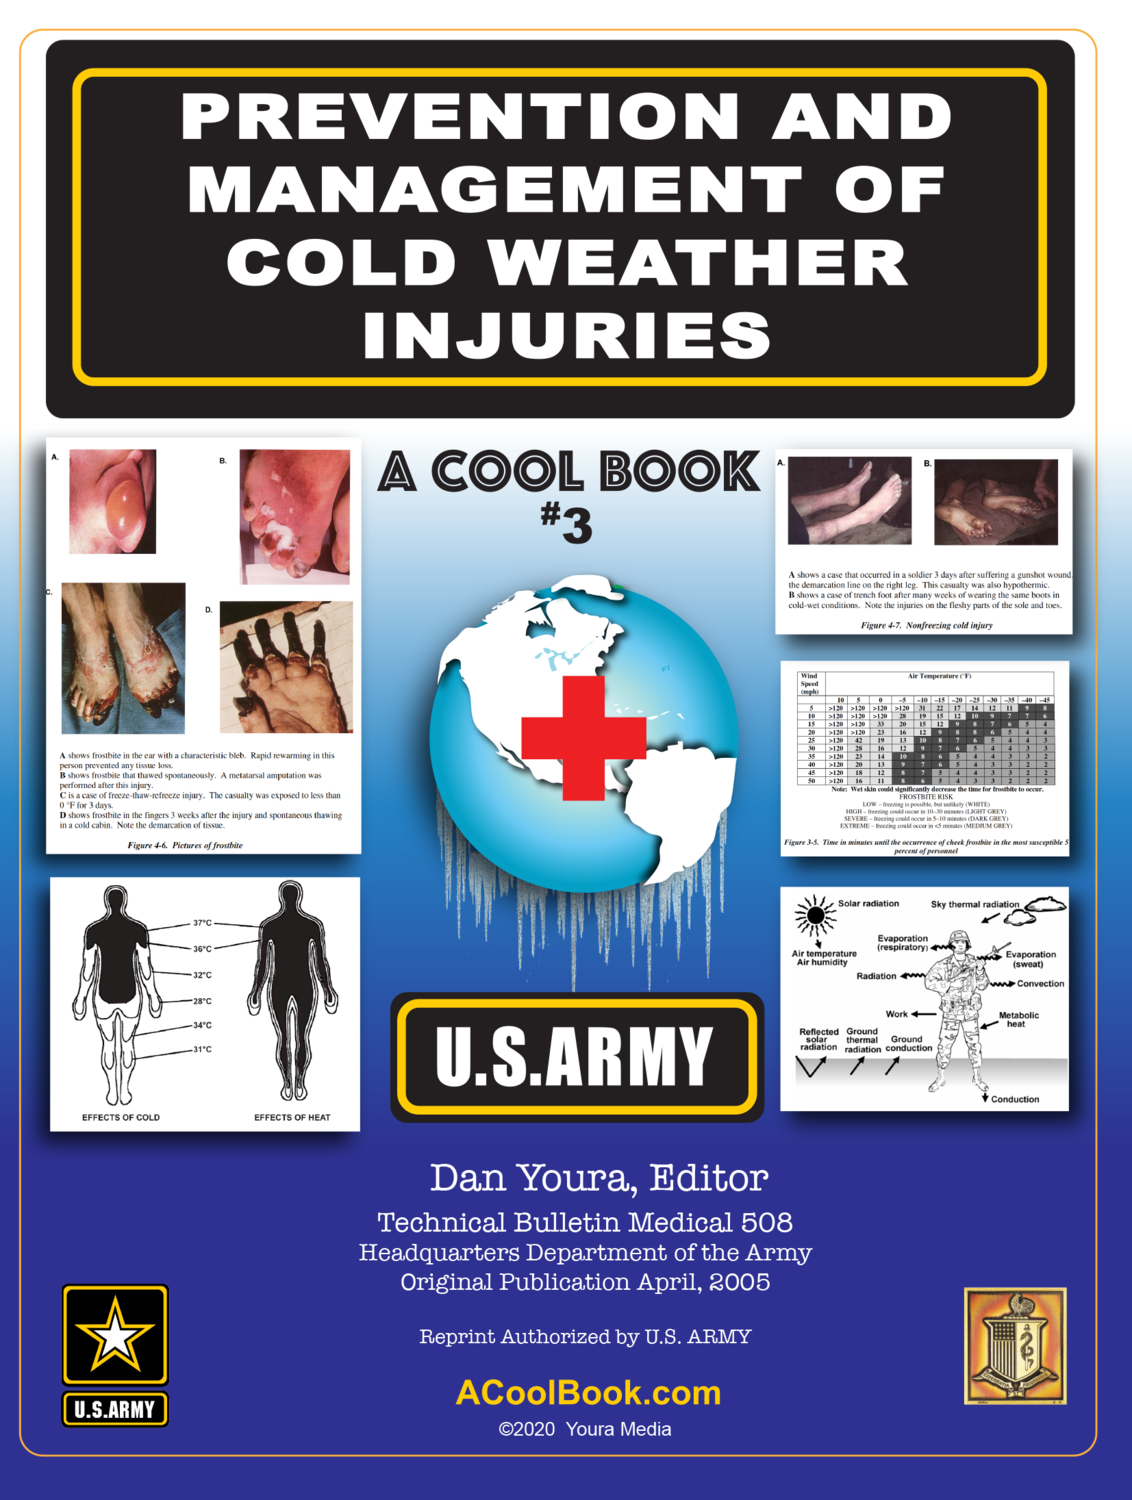 #1 Prevention and Management of Cold Weather Injuries BOOK #3 –– Download $2.00